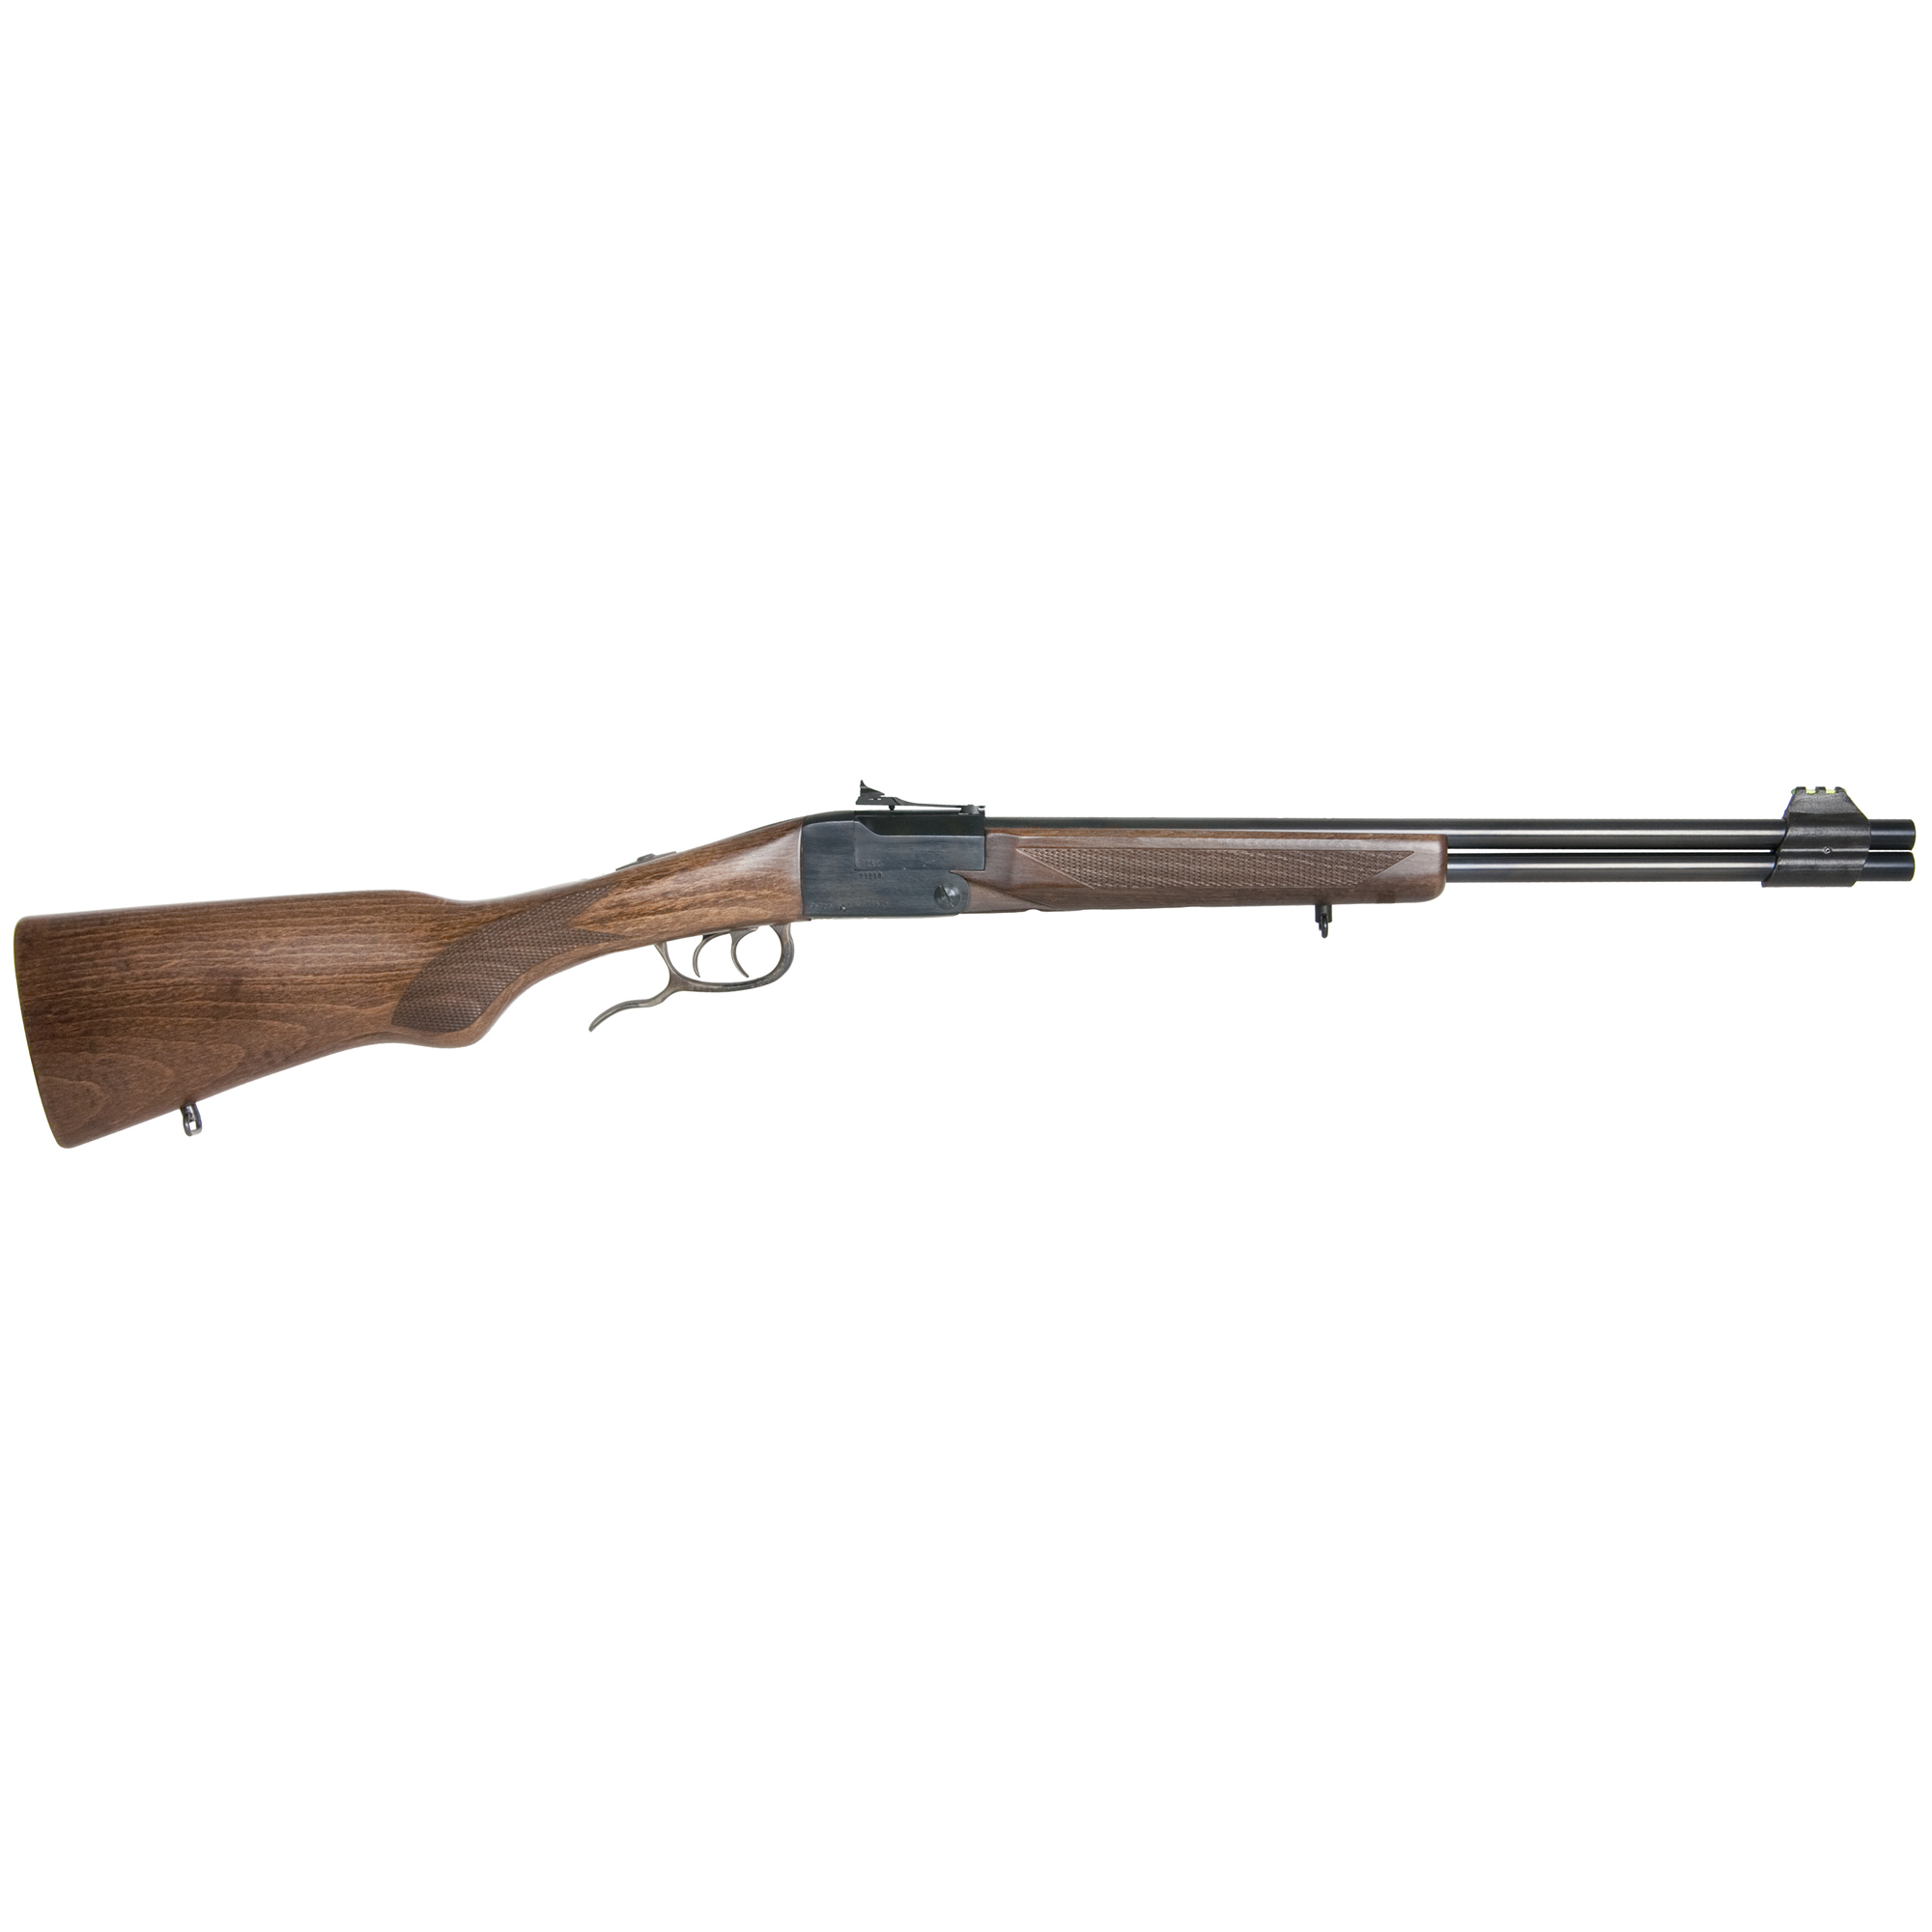 CHIAPPA DOUBLE BADGER 22LR/410 19